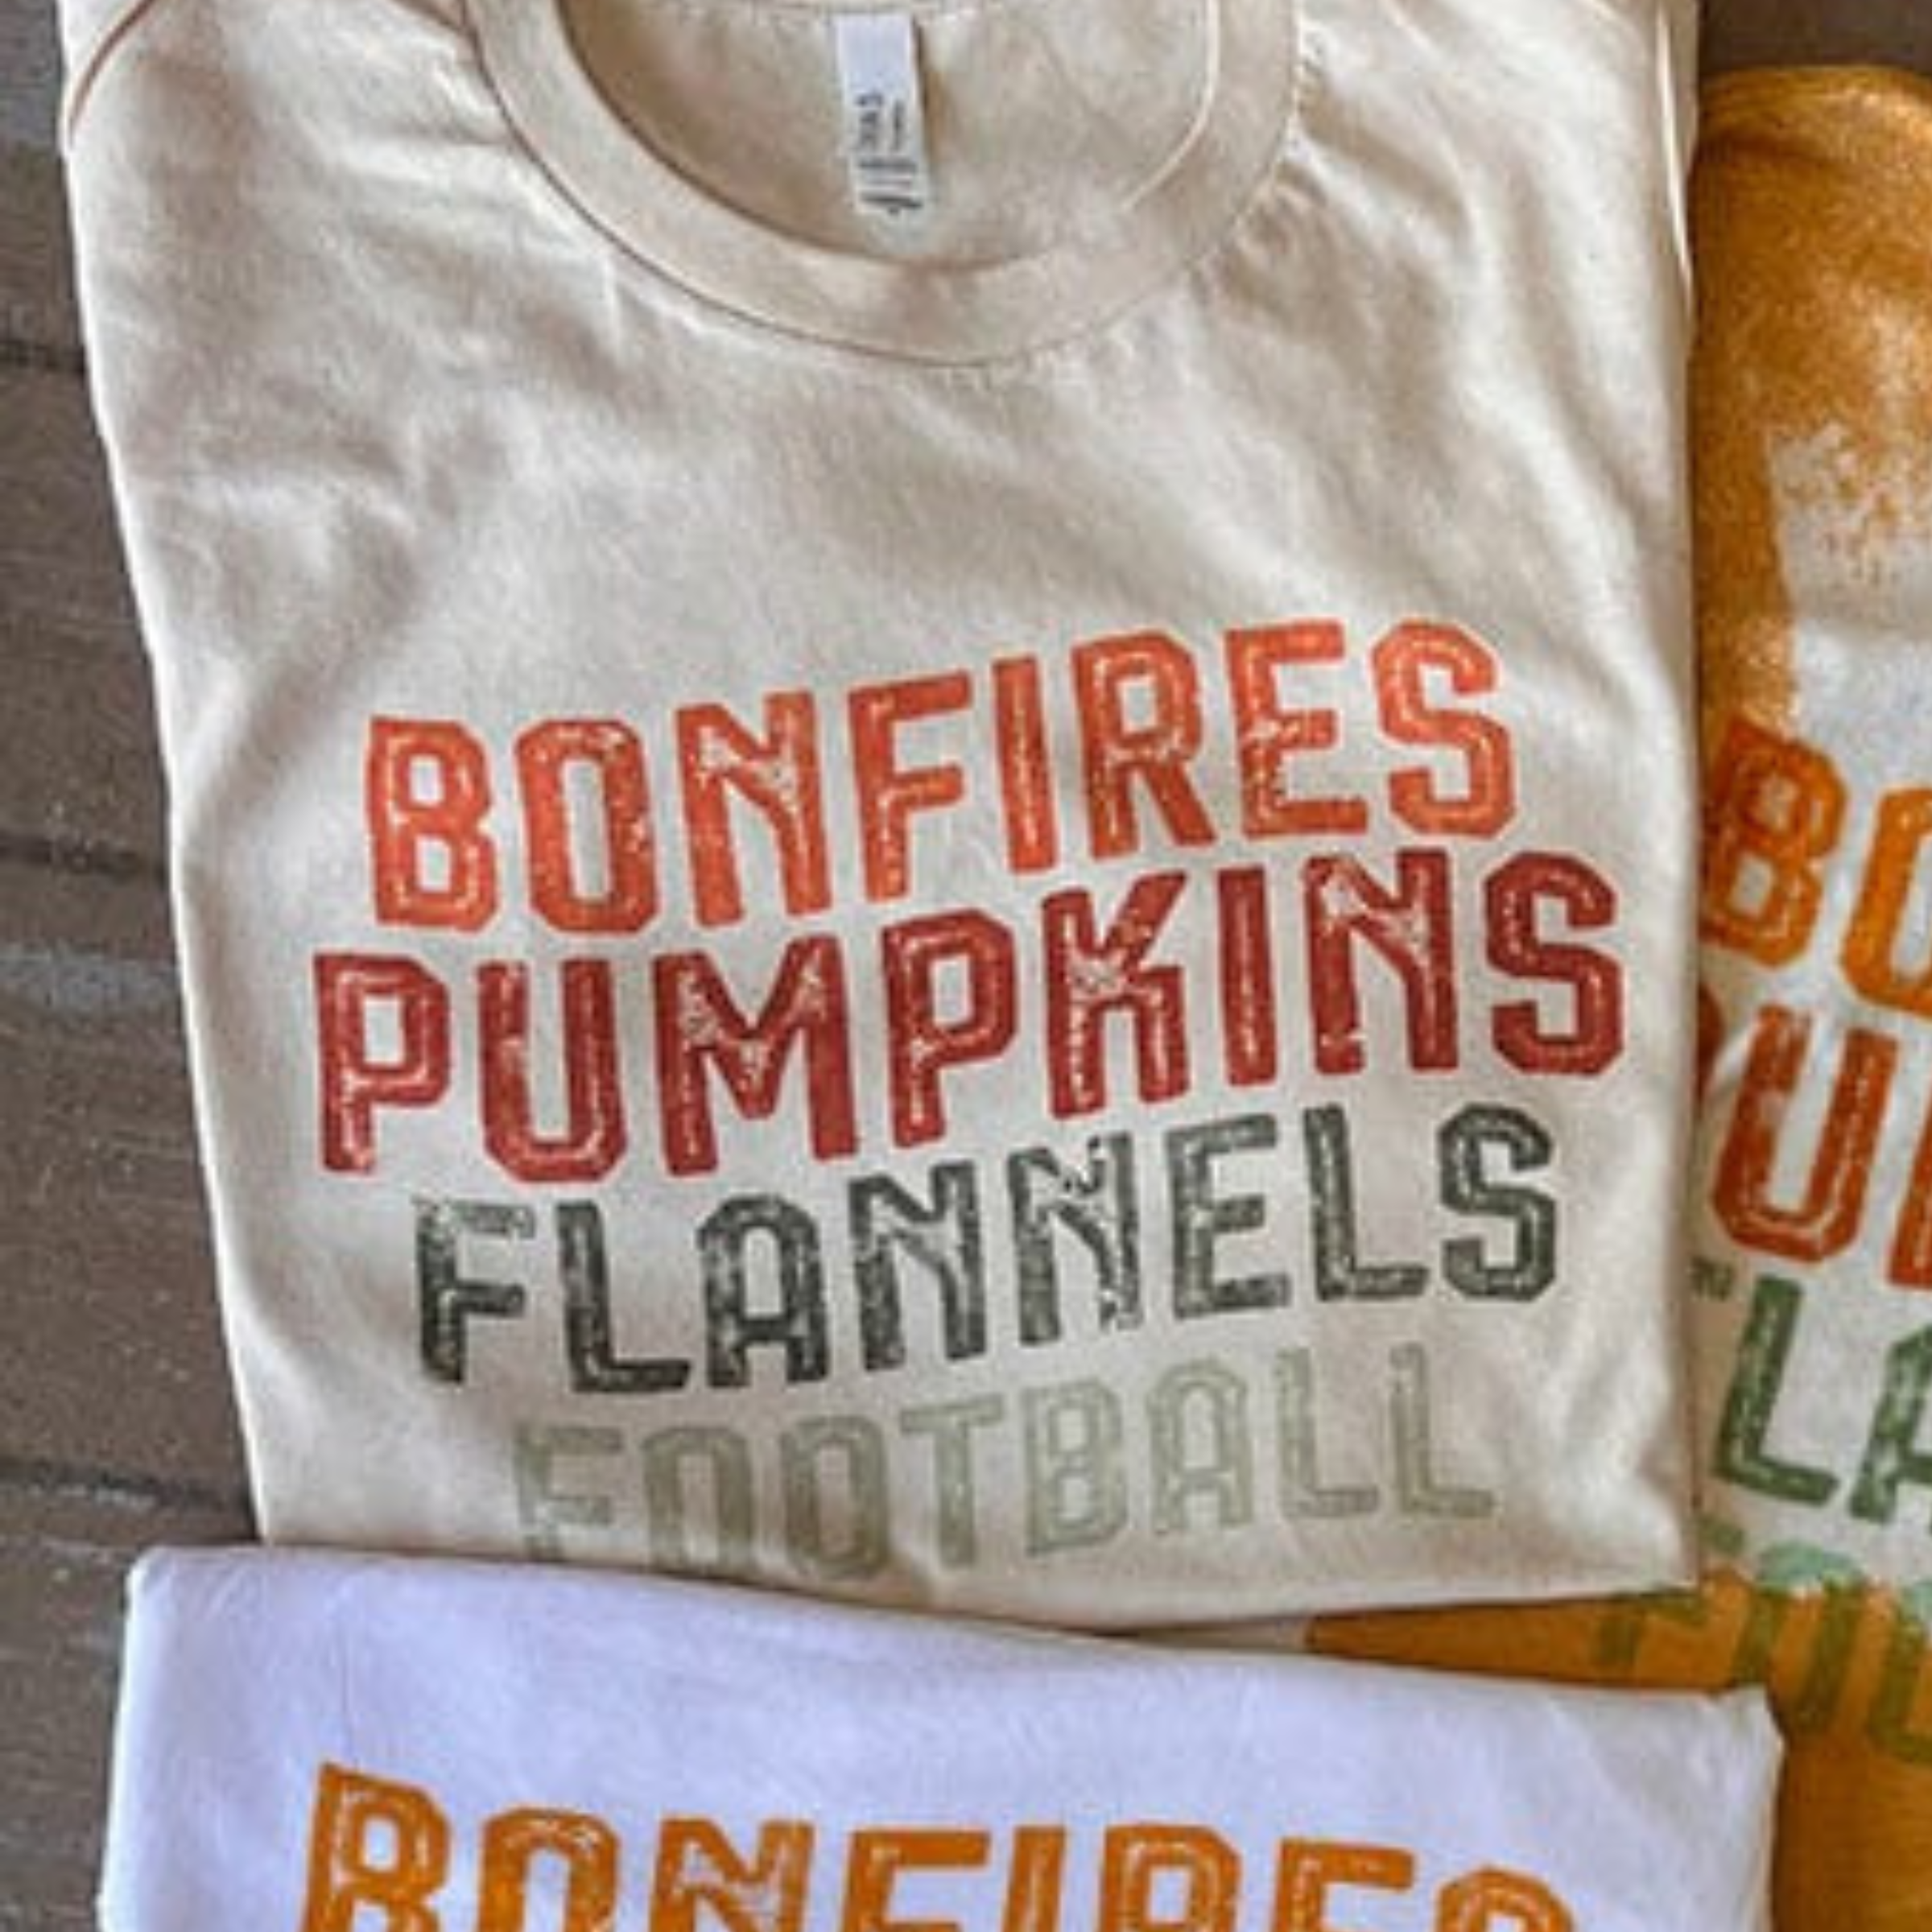 This cream tee includes a crew neckline, short sleeves, and a graphic with words "Bonfires Pumpkins Flannels Football". This is a Bella + Canvas Tee. It is shown as a folded flat lay in this photo.  